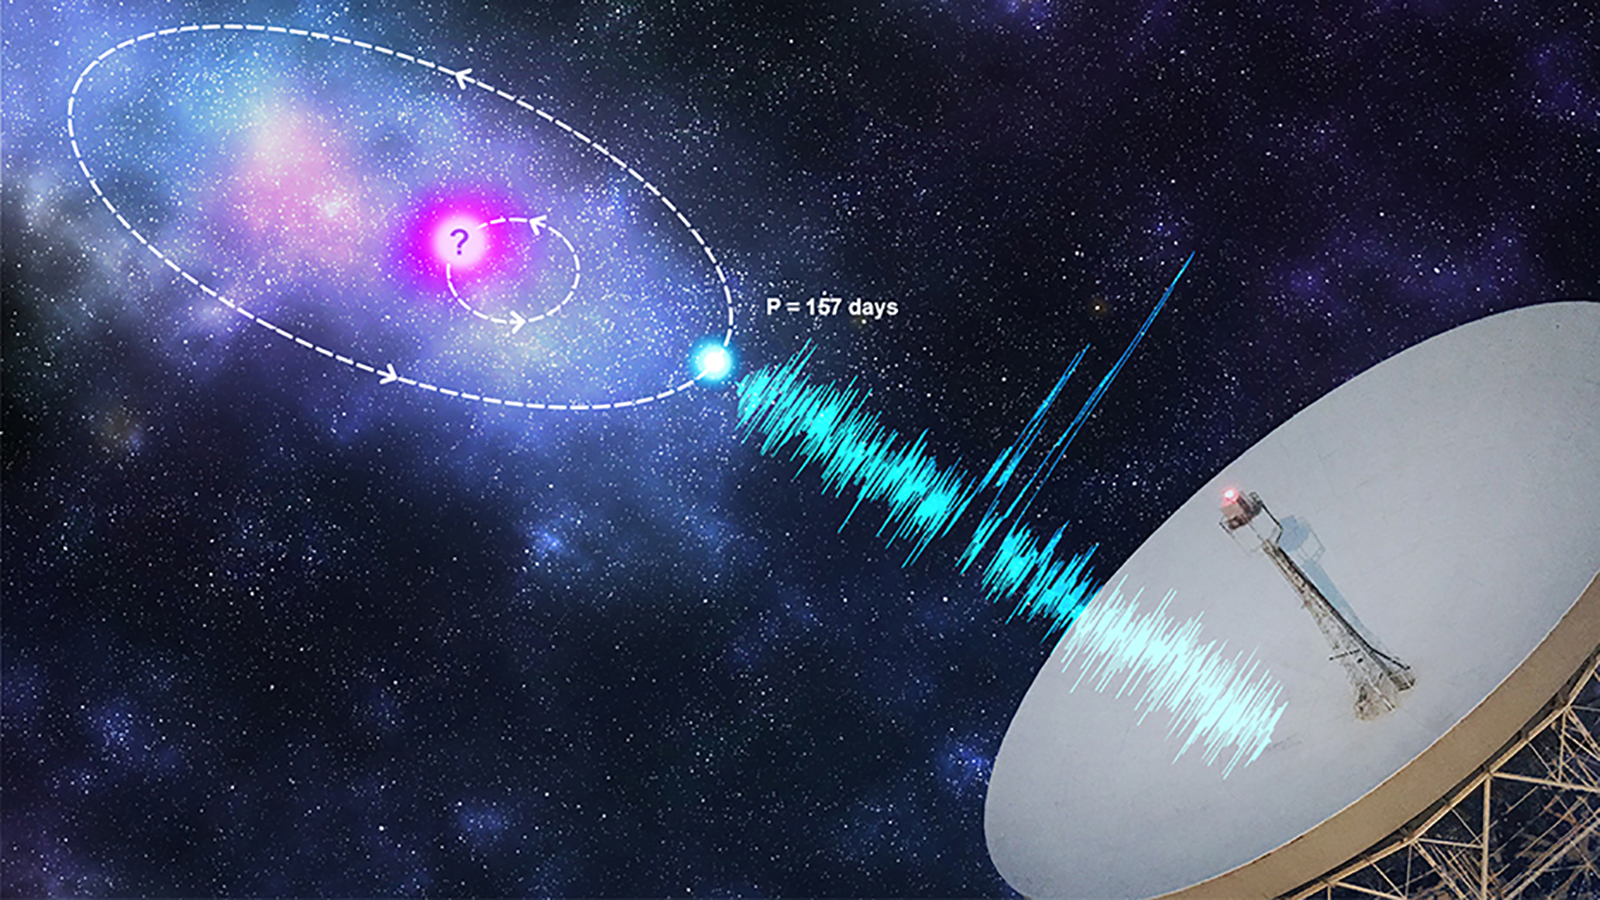 Another mysterious radio burst in space is repeating a pattern. This one  occurs every 157 days